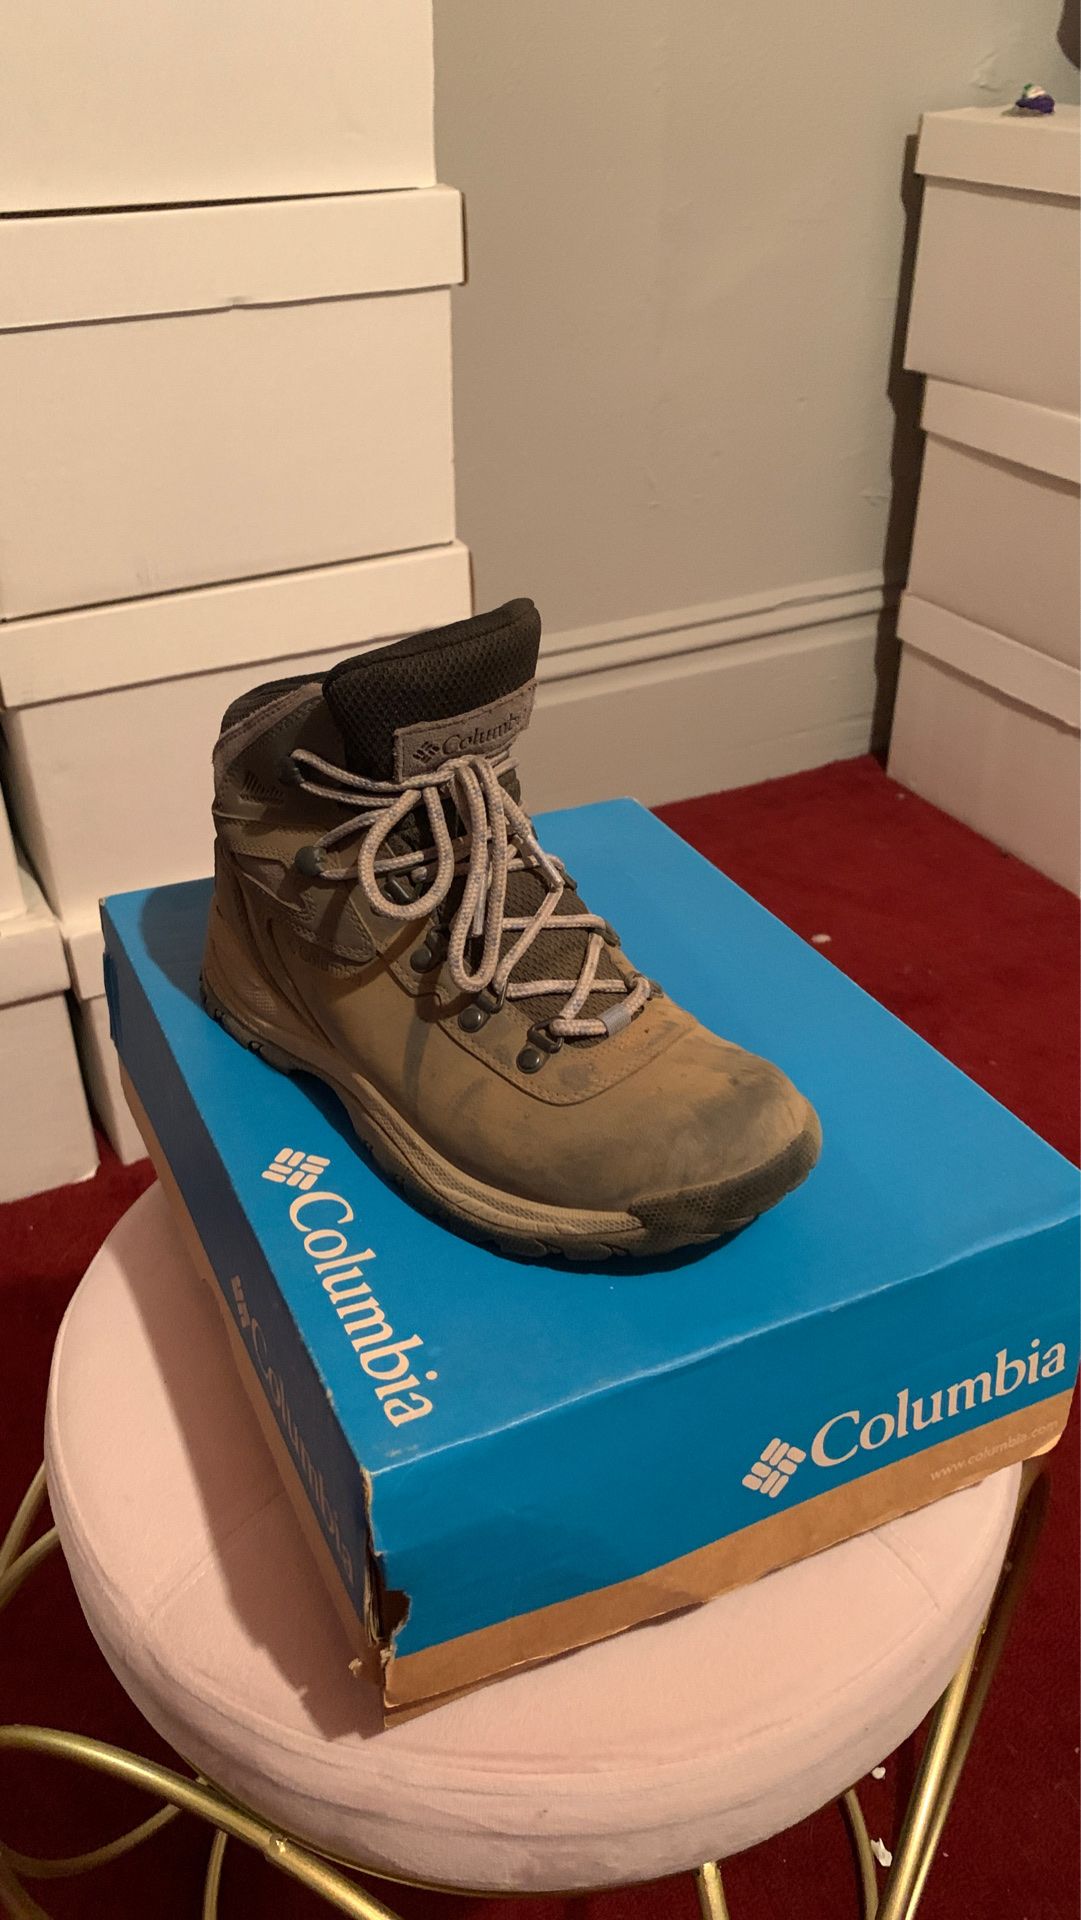 Hiking boots woman’s 8 1/2